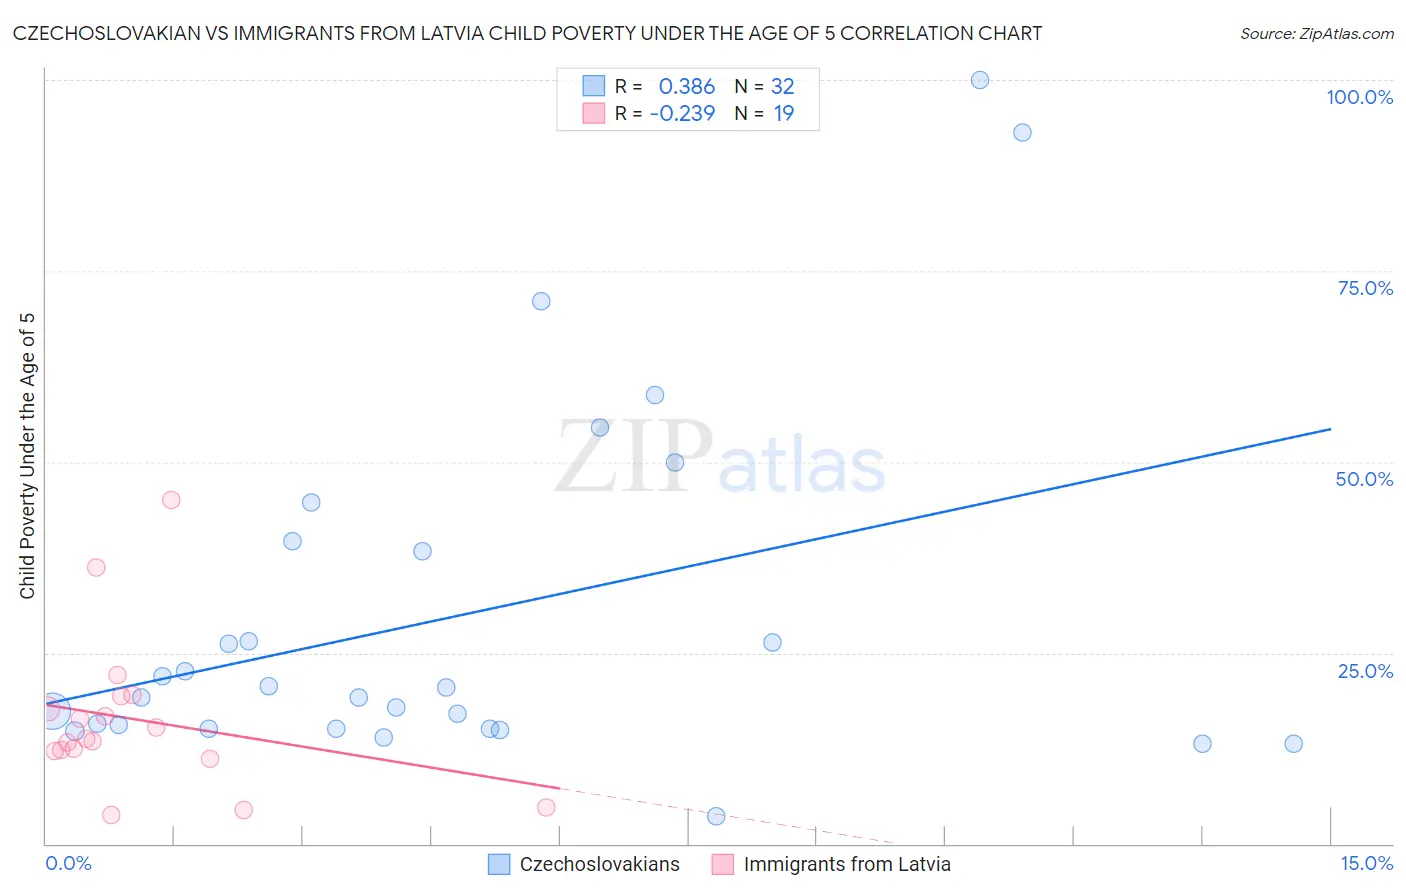 Czechoslovakian vs Immigrants from Latvia Child Poverty Under the Age of 5